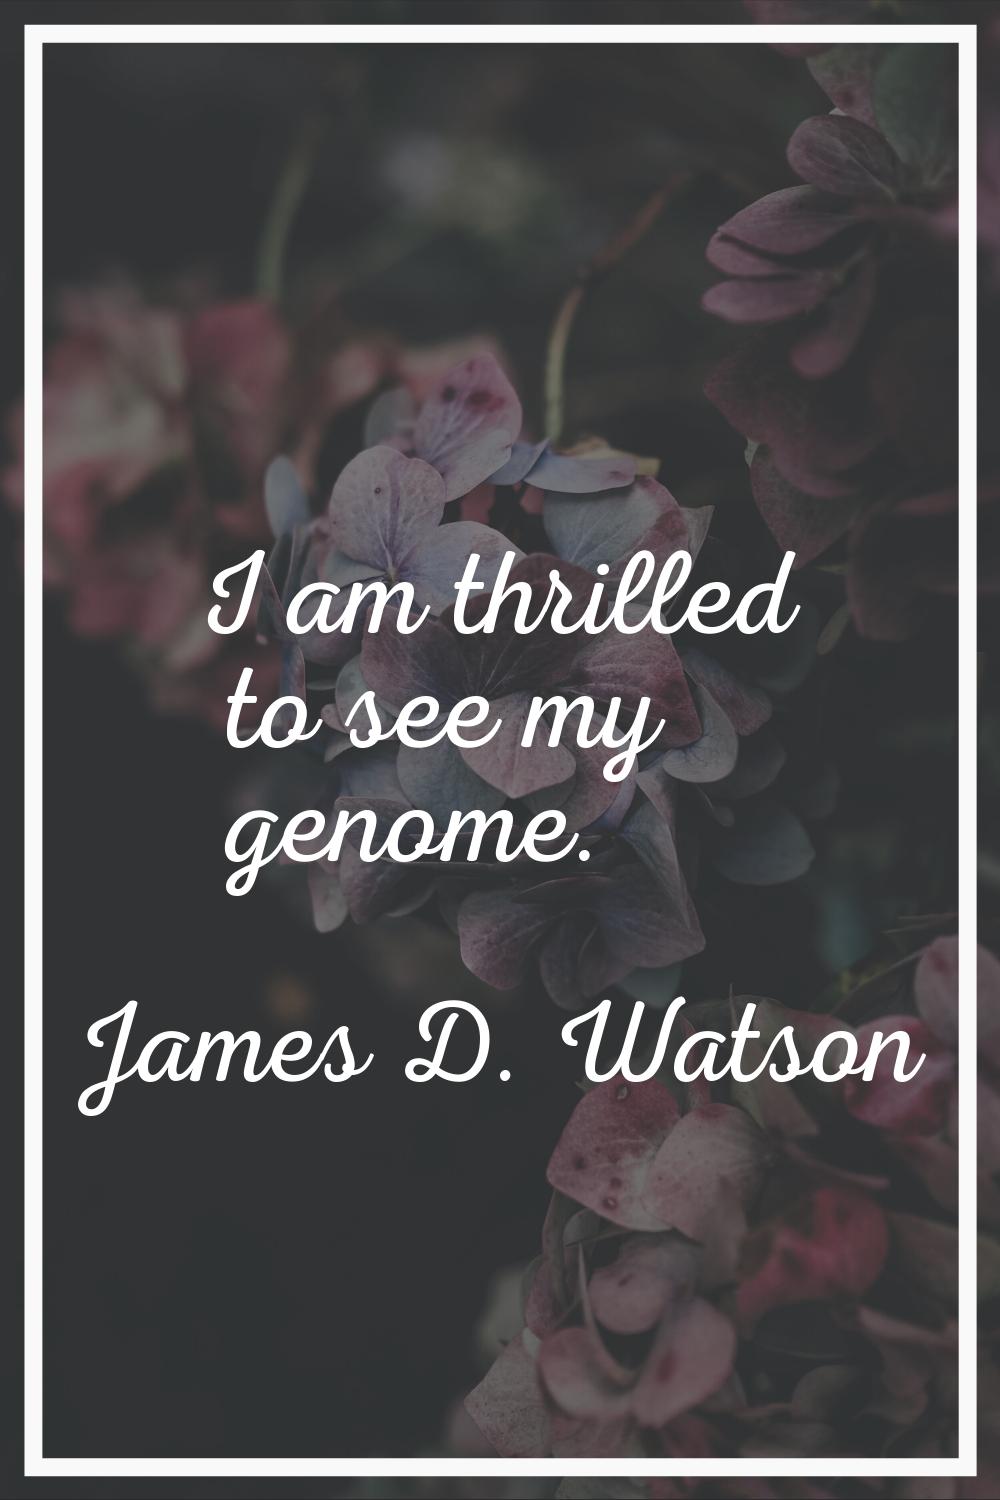 I am thrilled to see my genome.